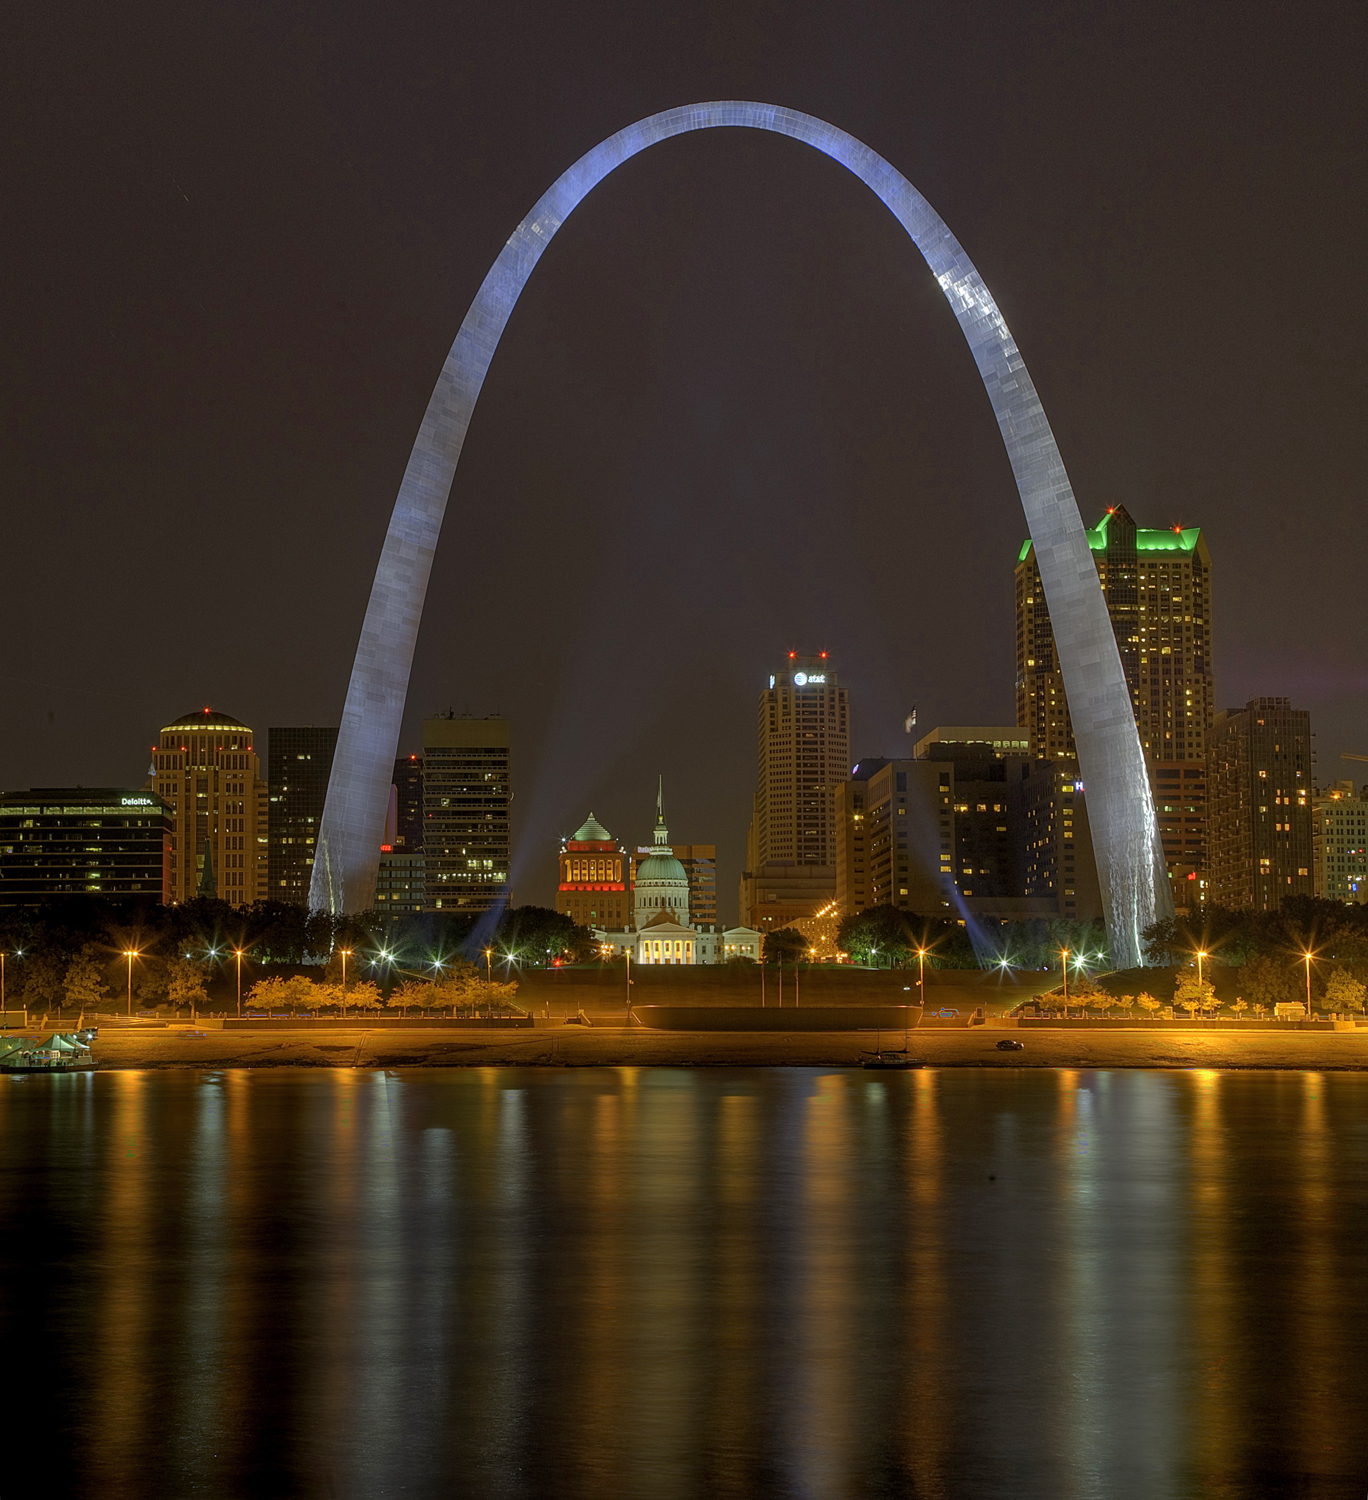 Meet me in St. Louis -- for a most sinful time! - www.paulmartinsmith.com